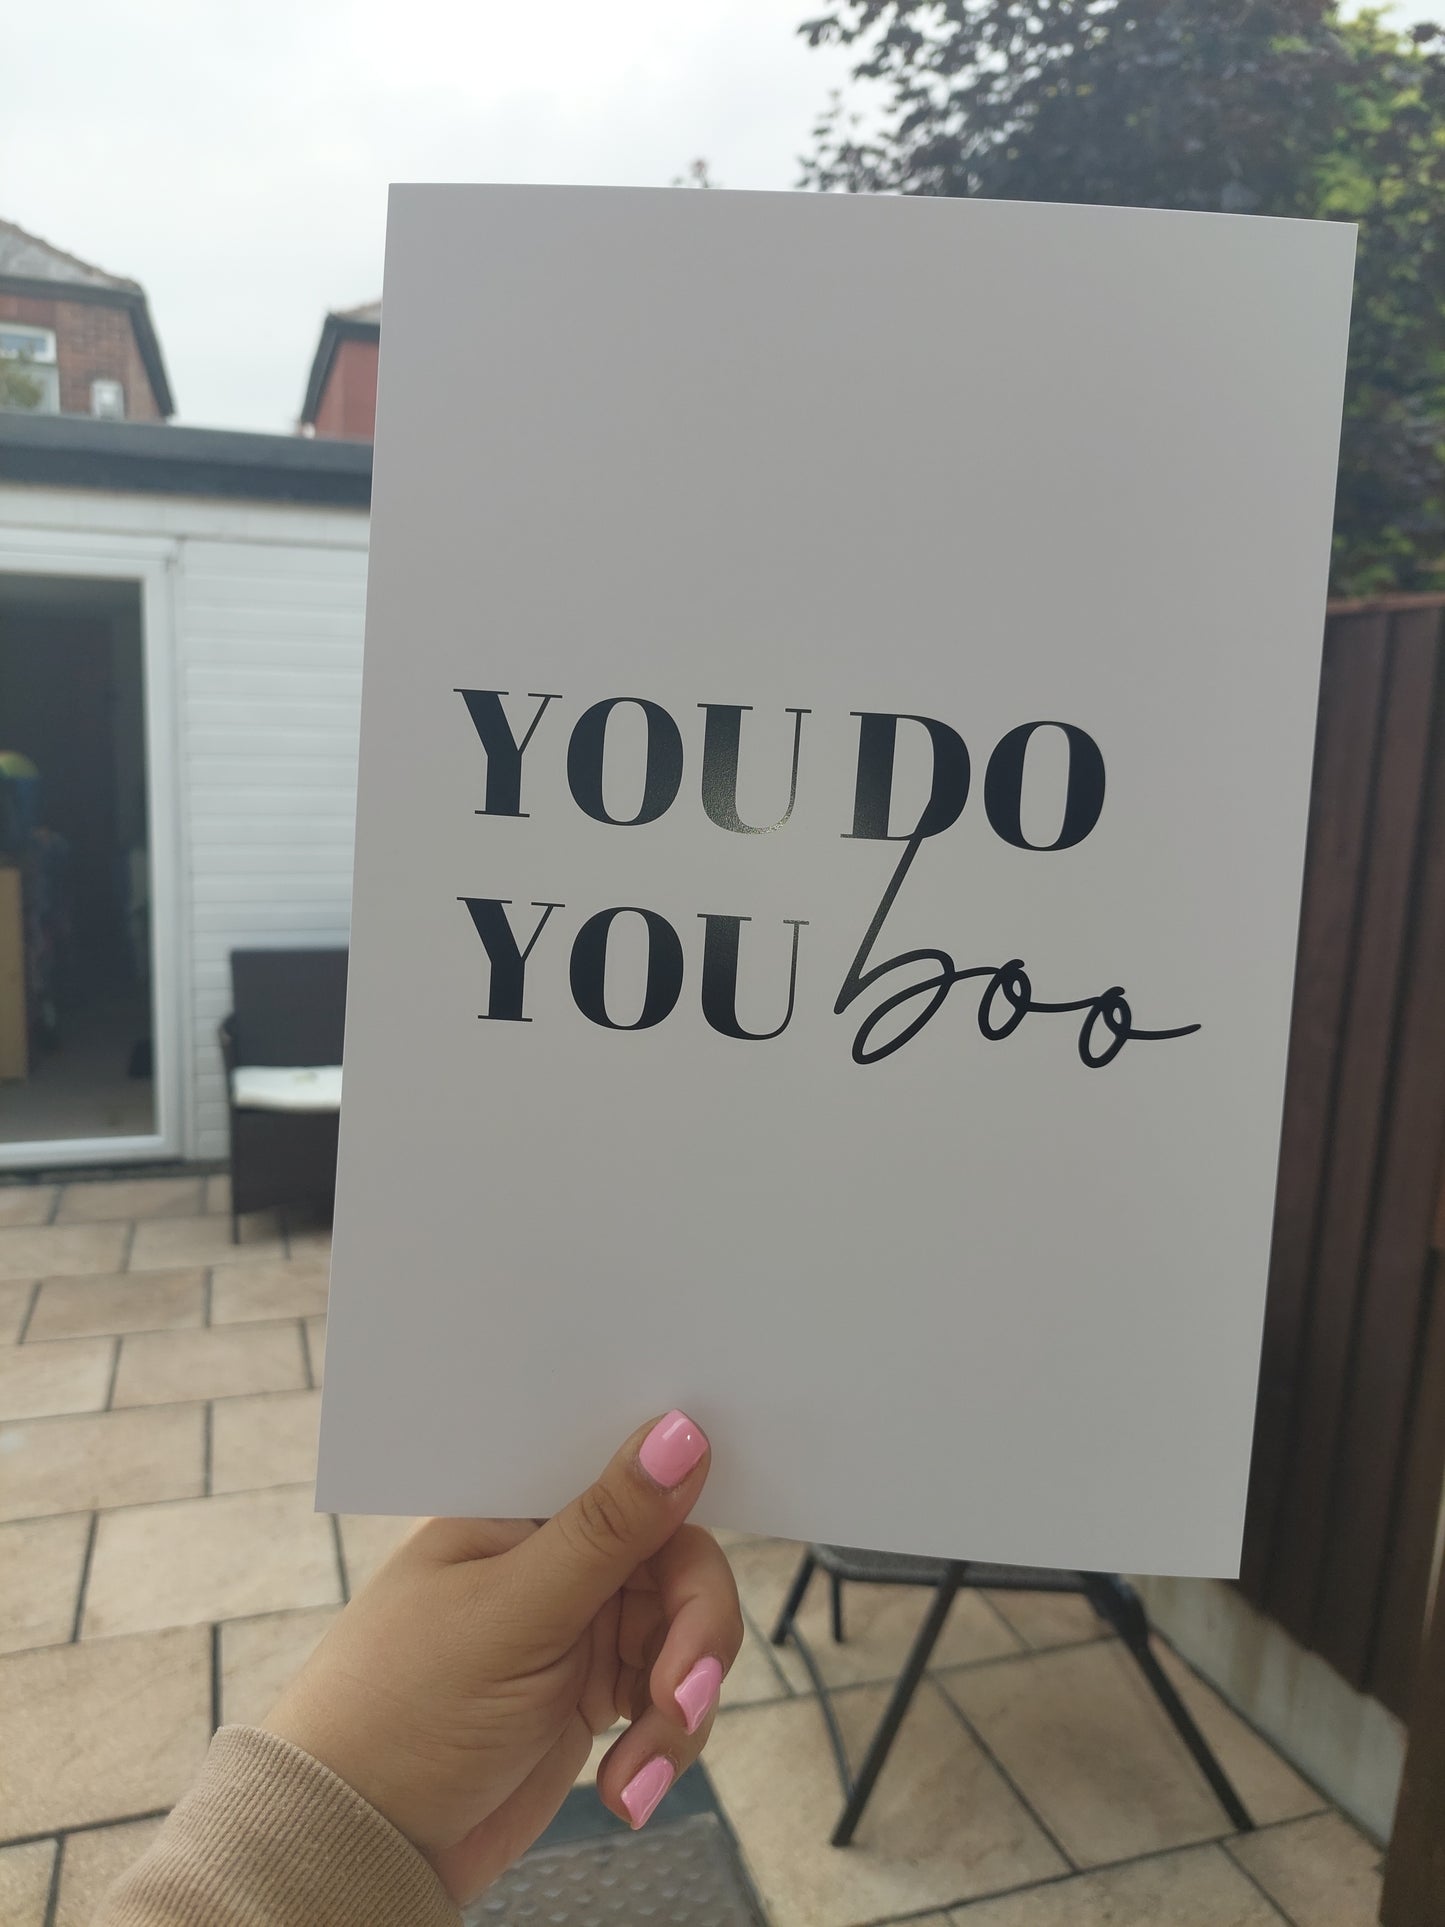 Quote Print | You Do You Boo | Positive Print